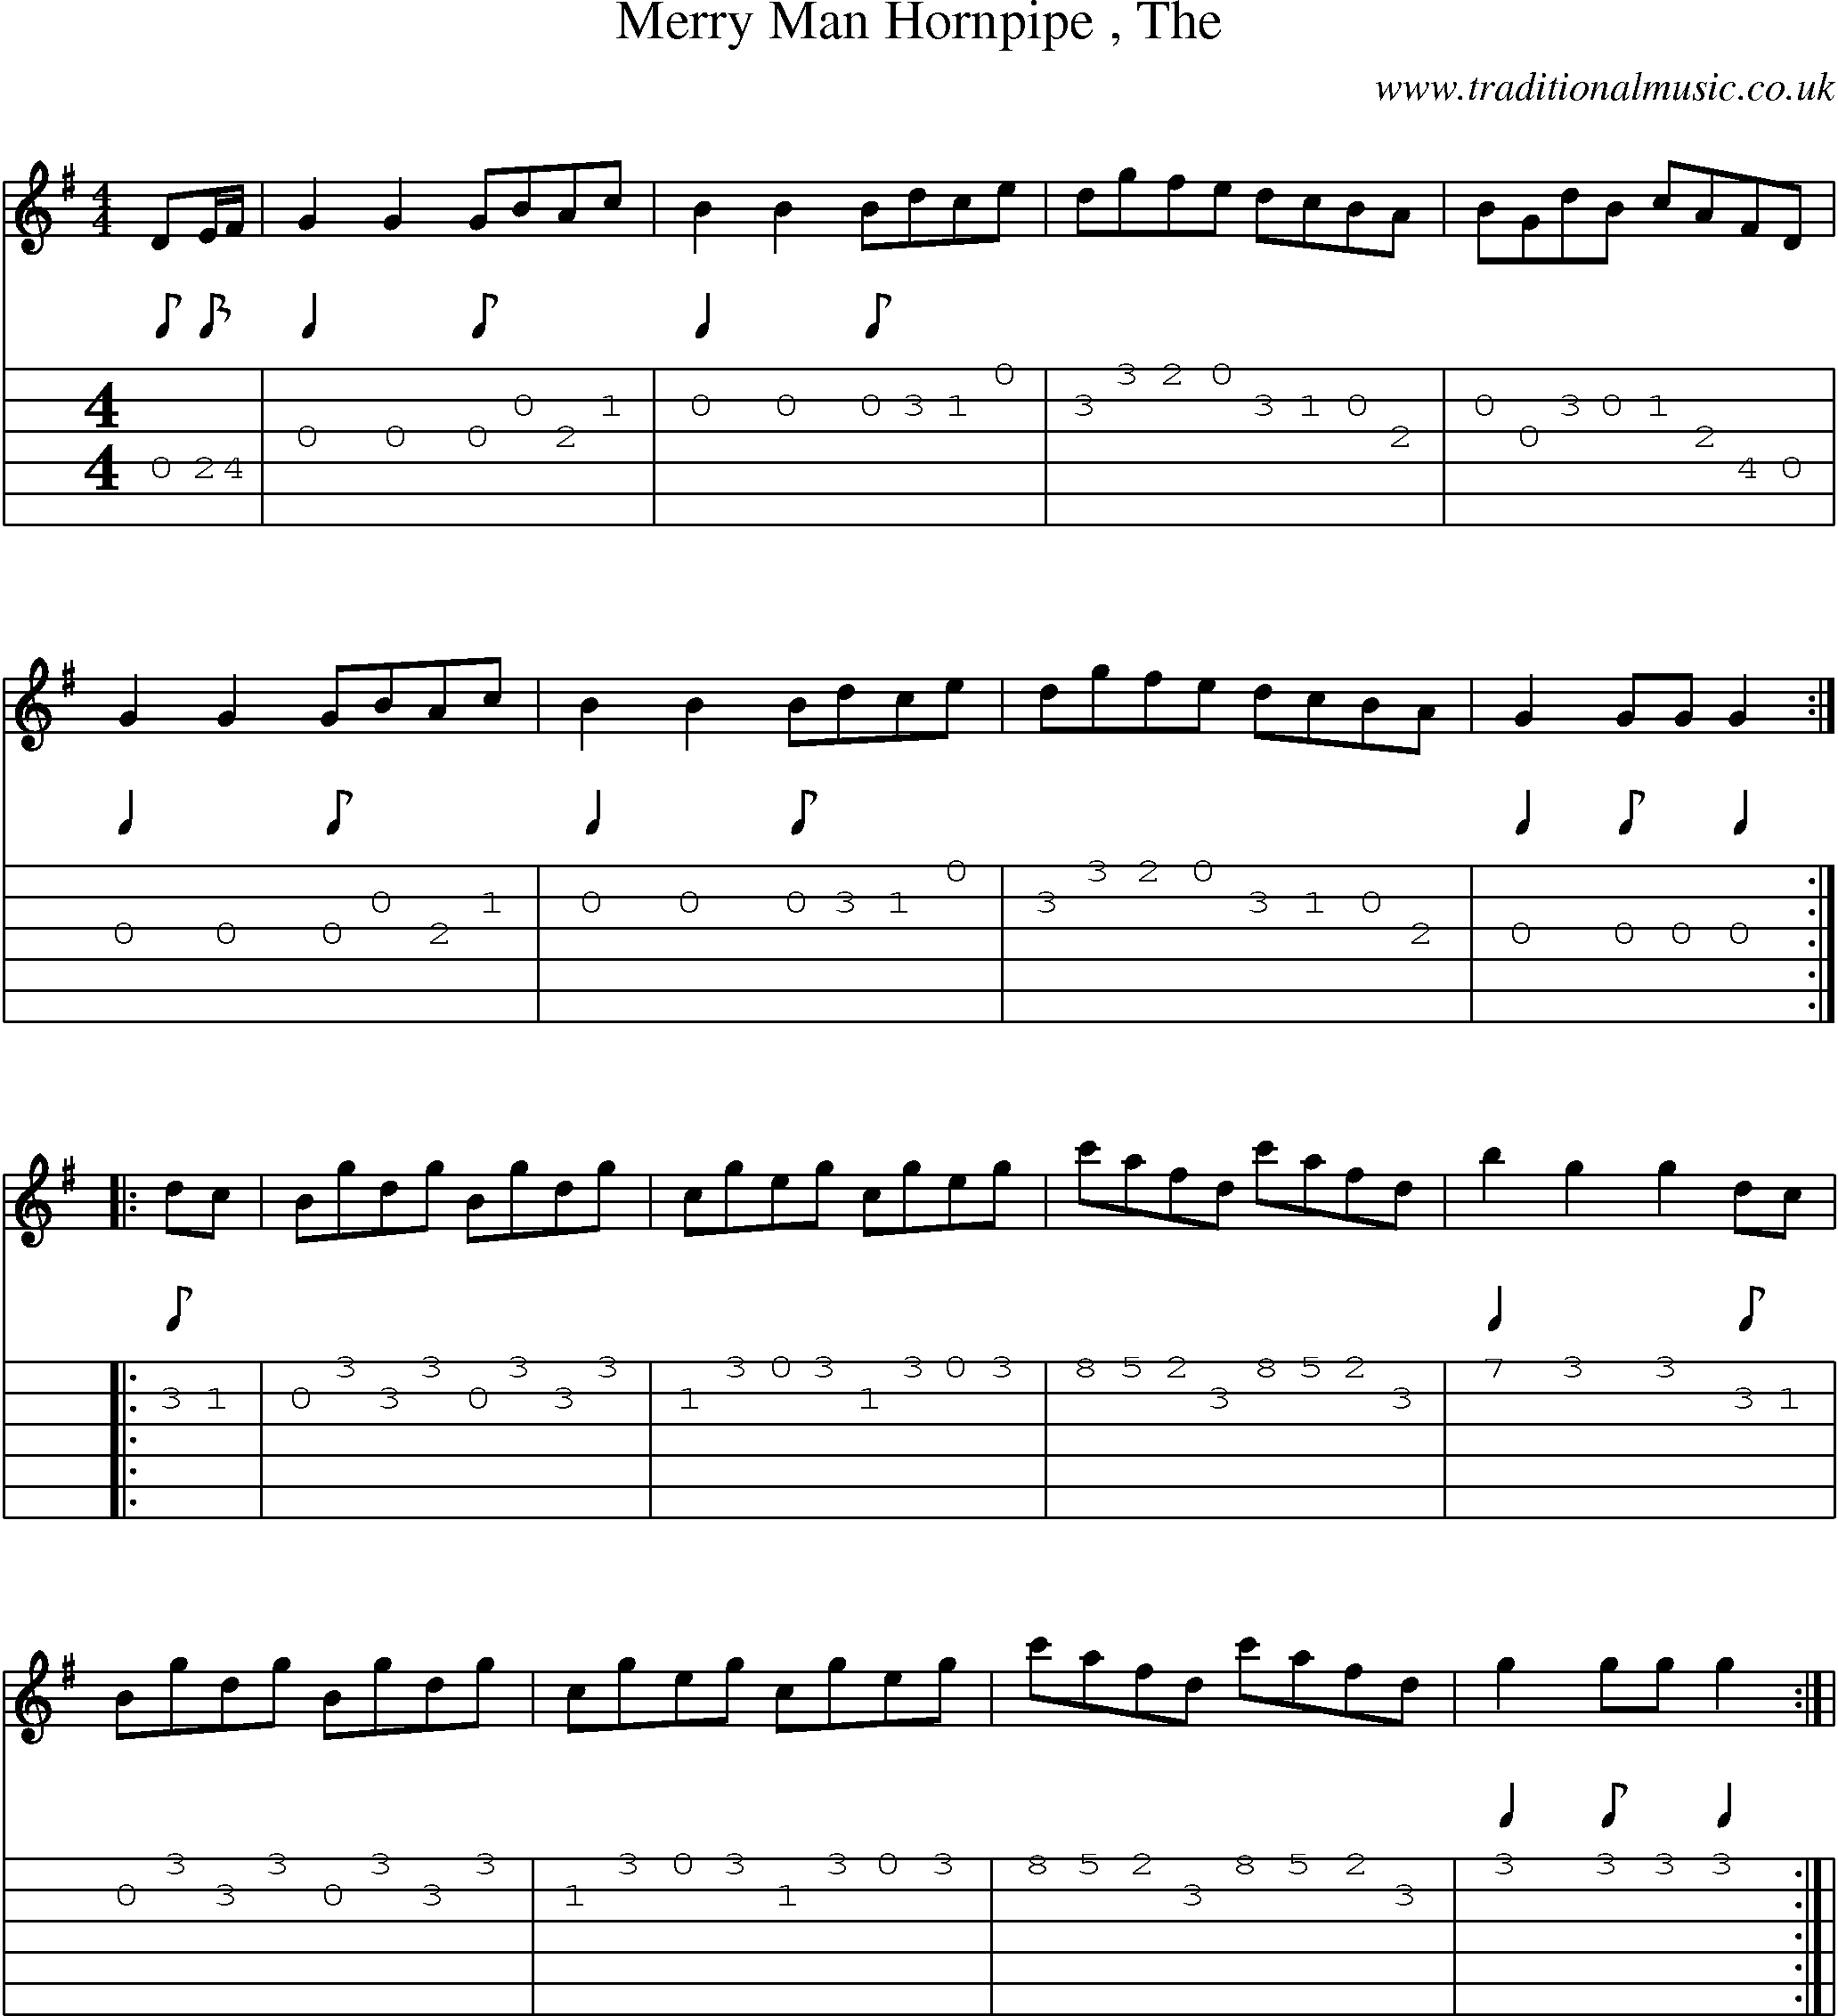 Music Score and Guitar Tabs for Merry Man Hornpipe